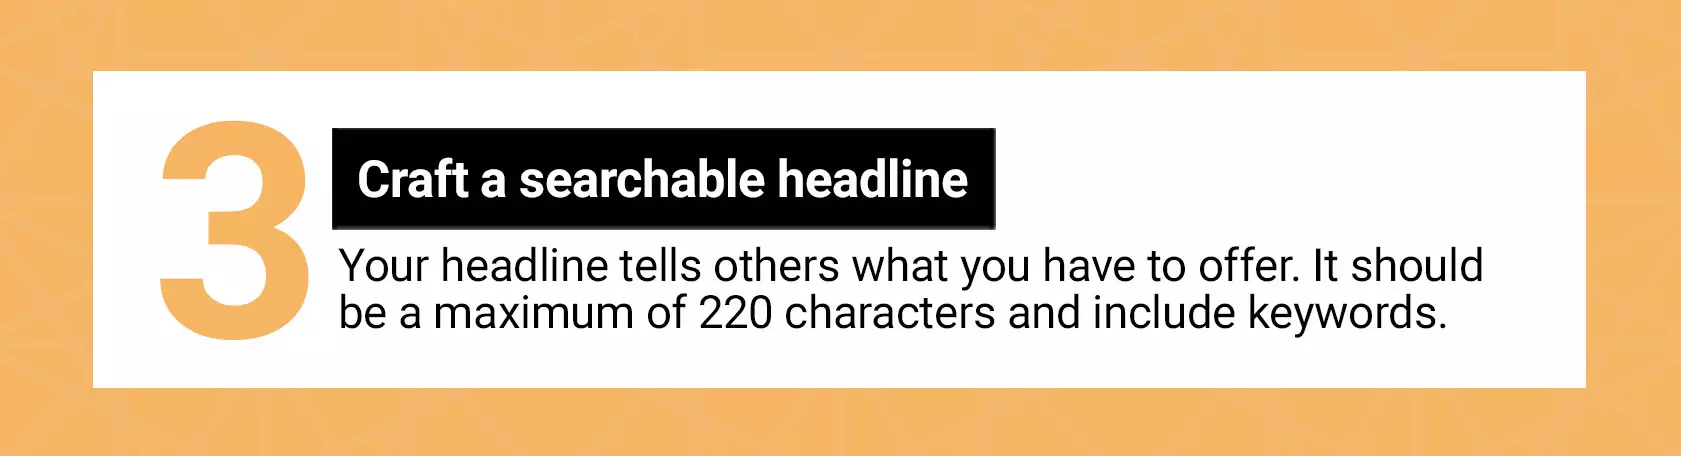 3 Craft a searchable headline. Your headline tells others what you have to offer. It should be a maximum of 220 characters and include keywords.